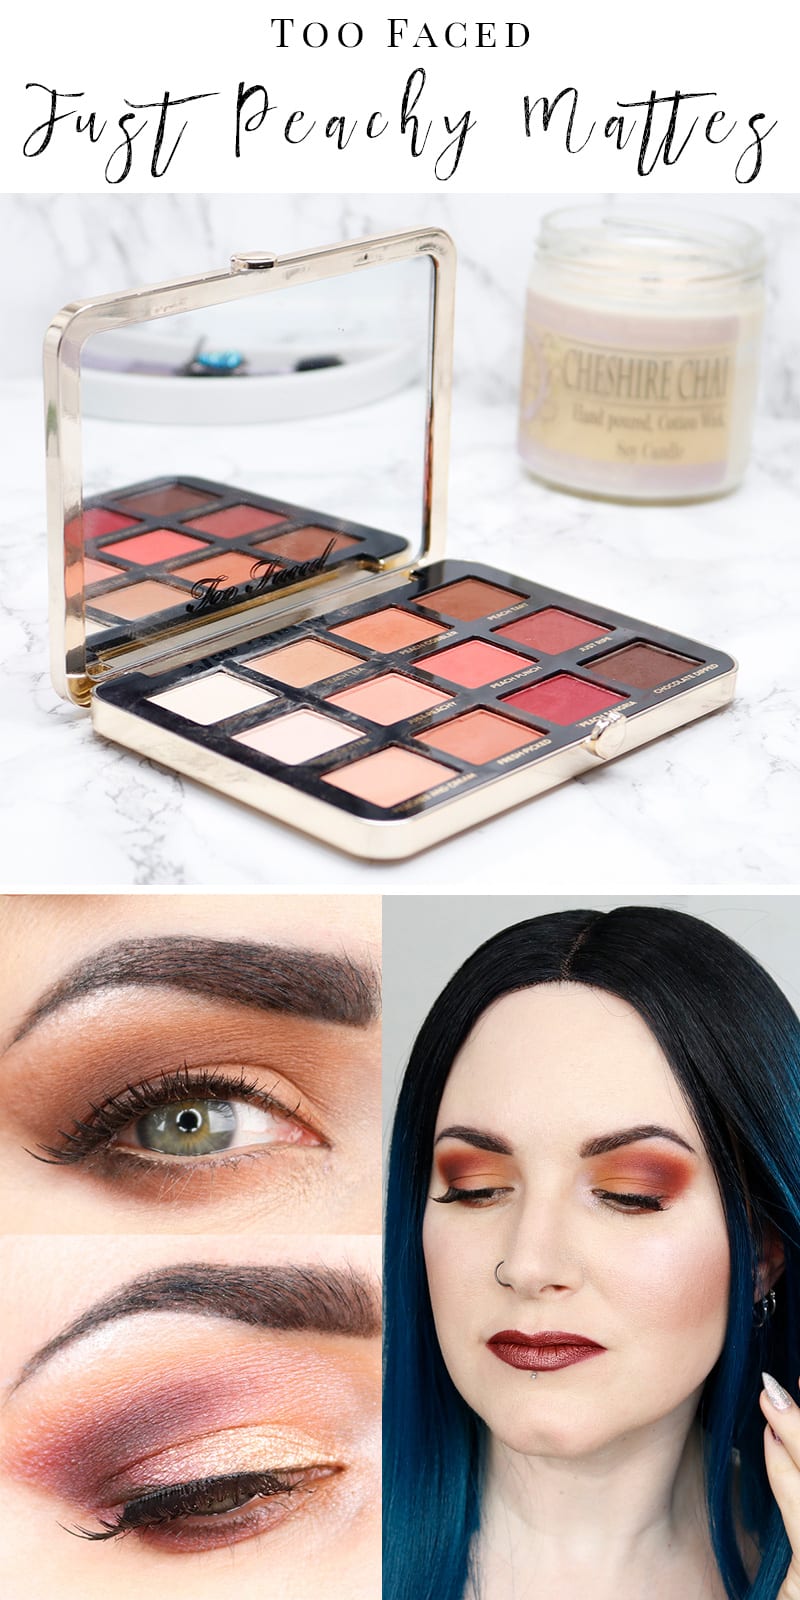 Too Faced Just Peachy Mattes Palette - I've got my review, swatches, tutorials and looks with this warm toned palette. It's gorgeous on blue green eyes and easy to work with. Cruelty free and vegan!